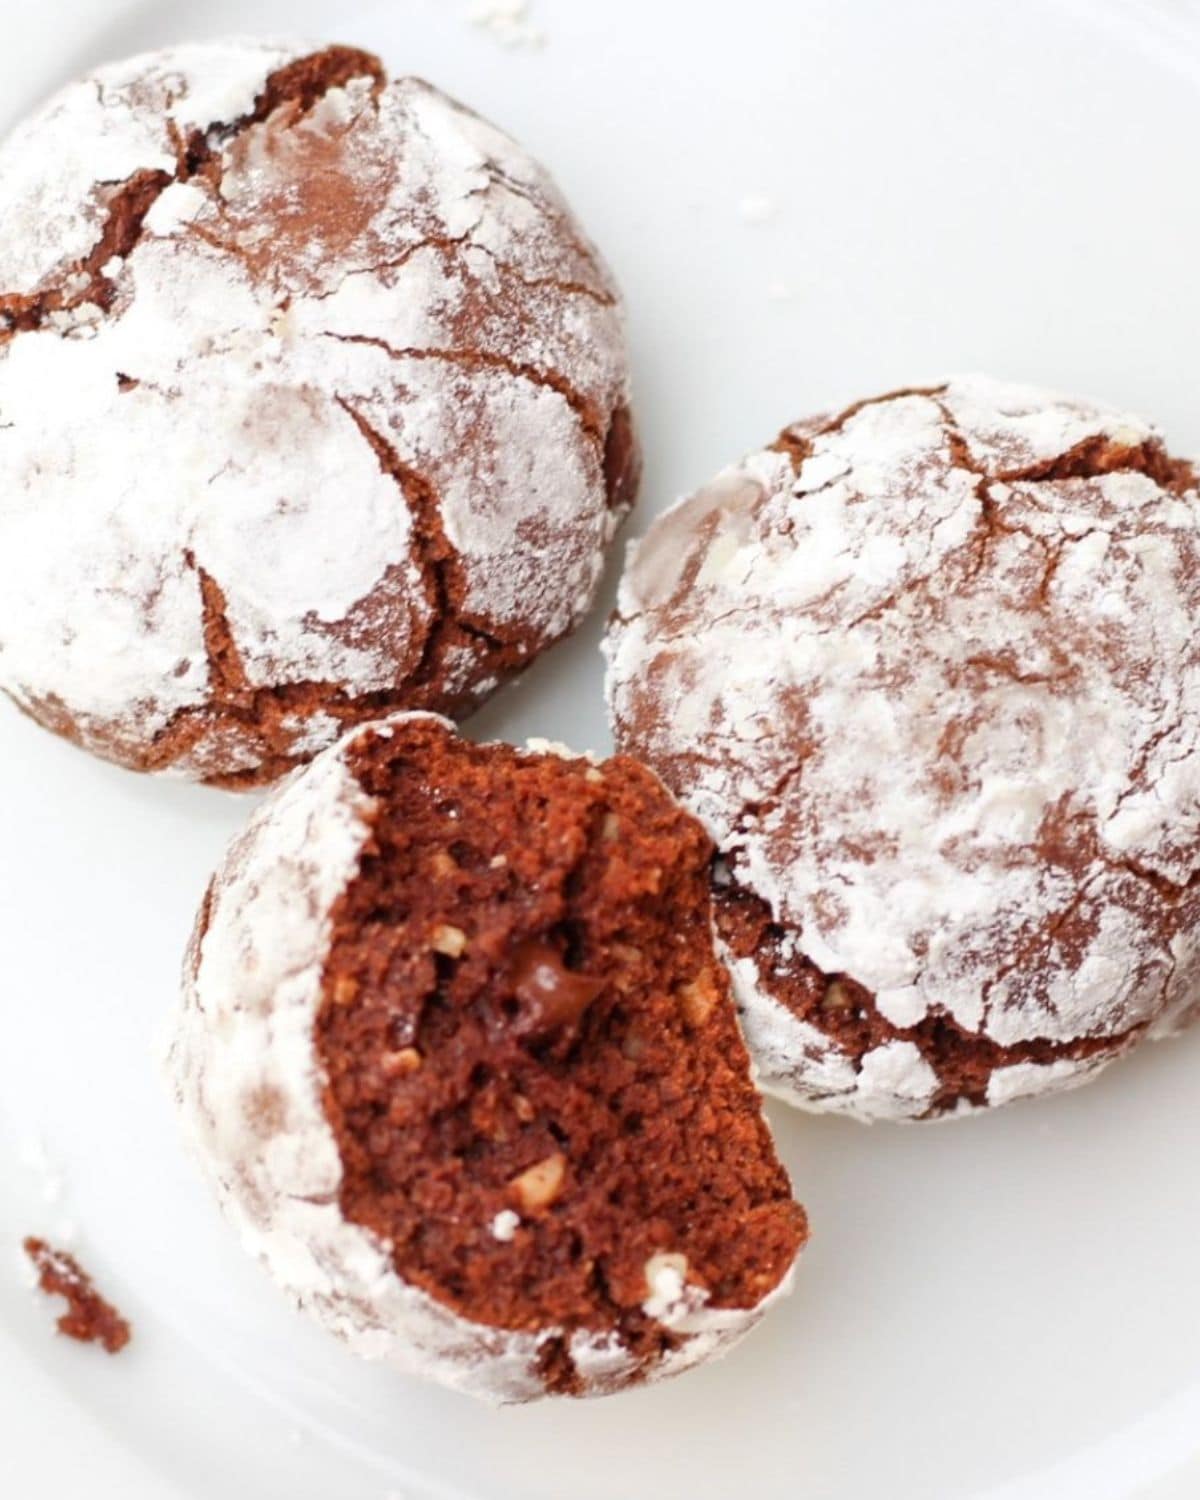 Three chocolate crinkle cookies on a white plate. One of cookies is halved showing the chocolate soft texture in the inside.